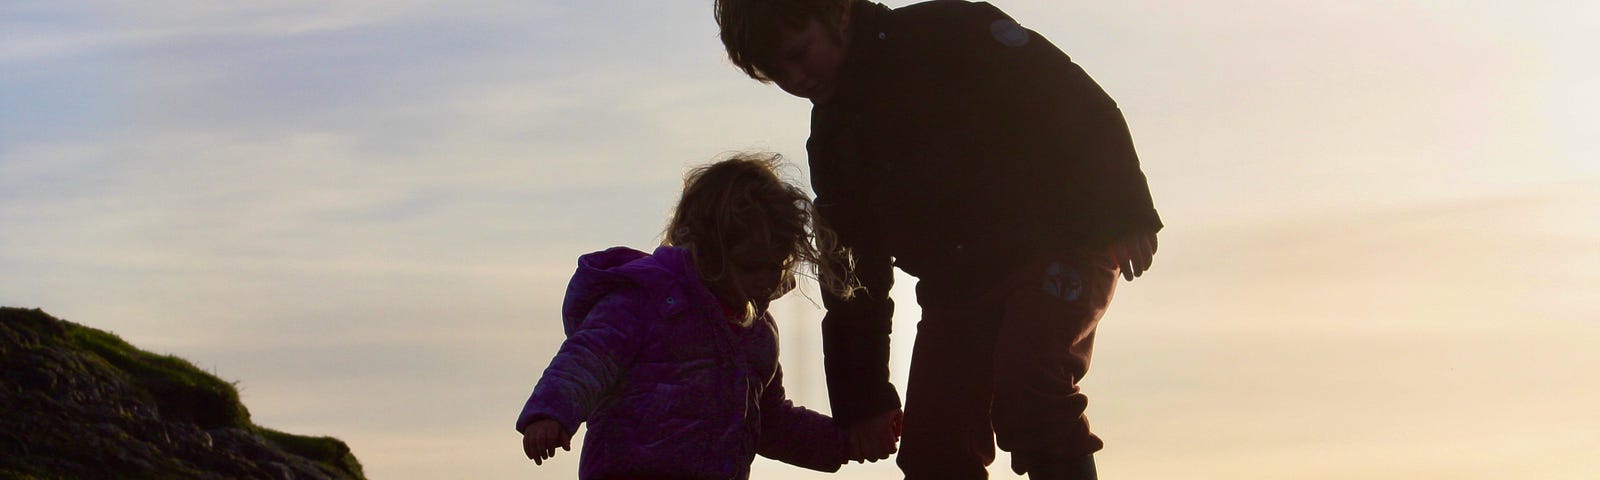 Two children are holding hands climbing down a rocky precipice